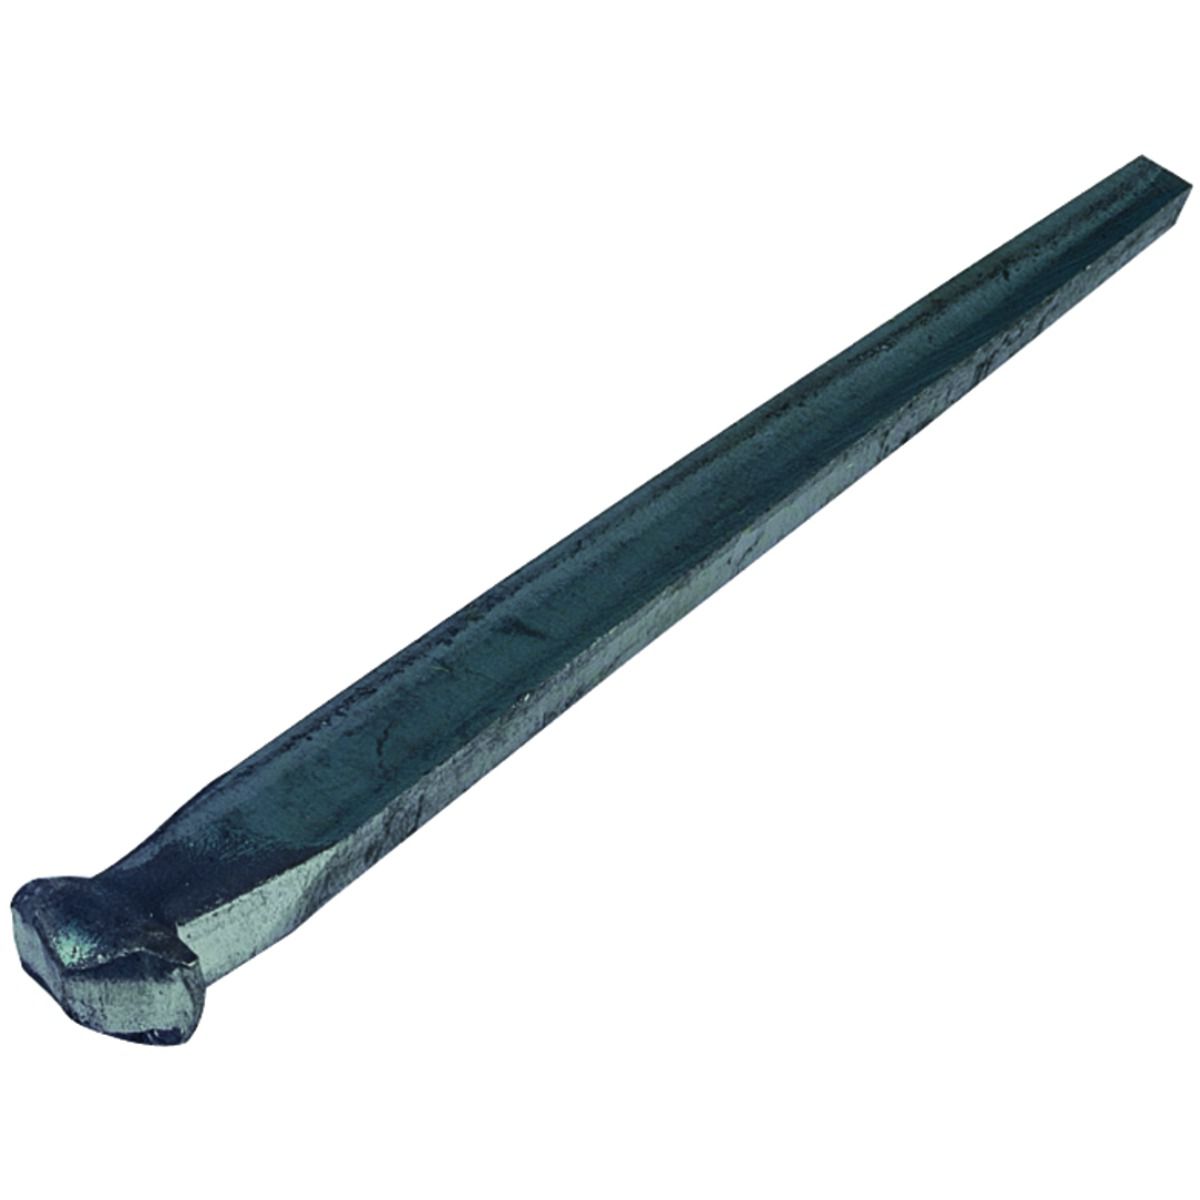 Image of Wickes 75mm Cut Clasp Construction Nails - 400g